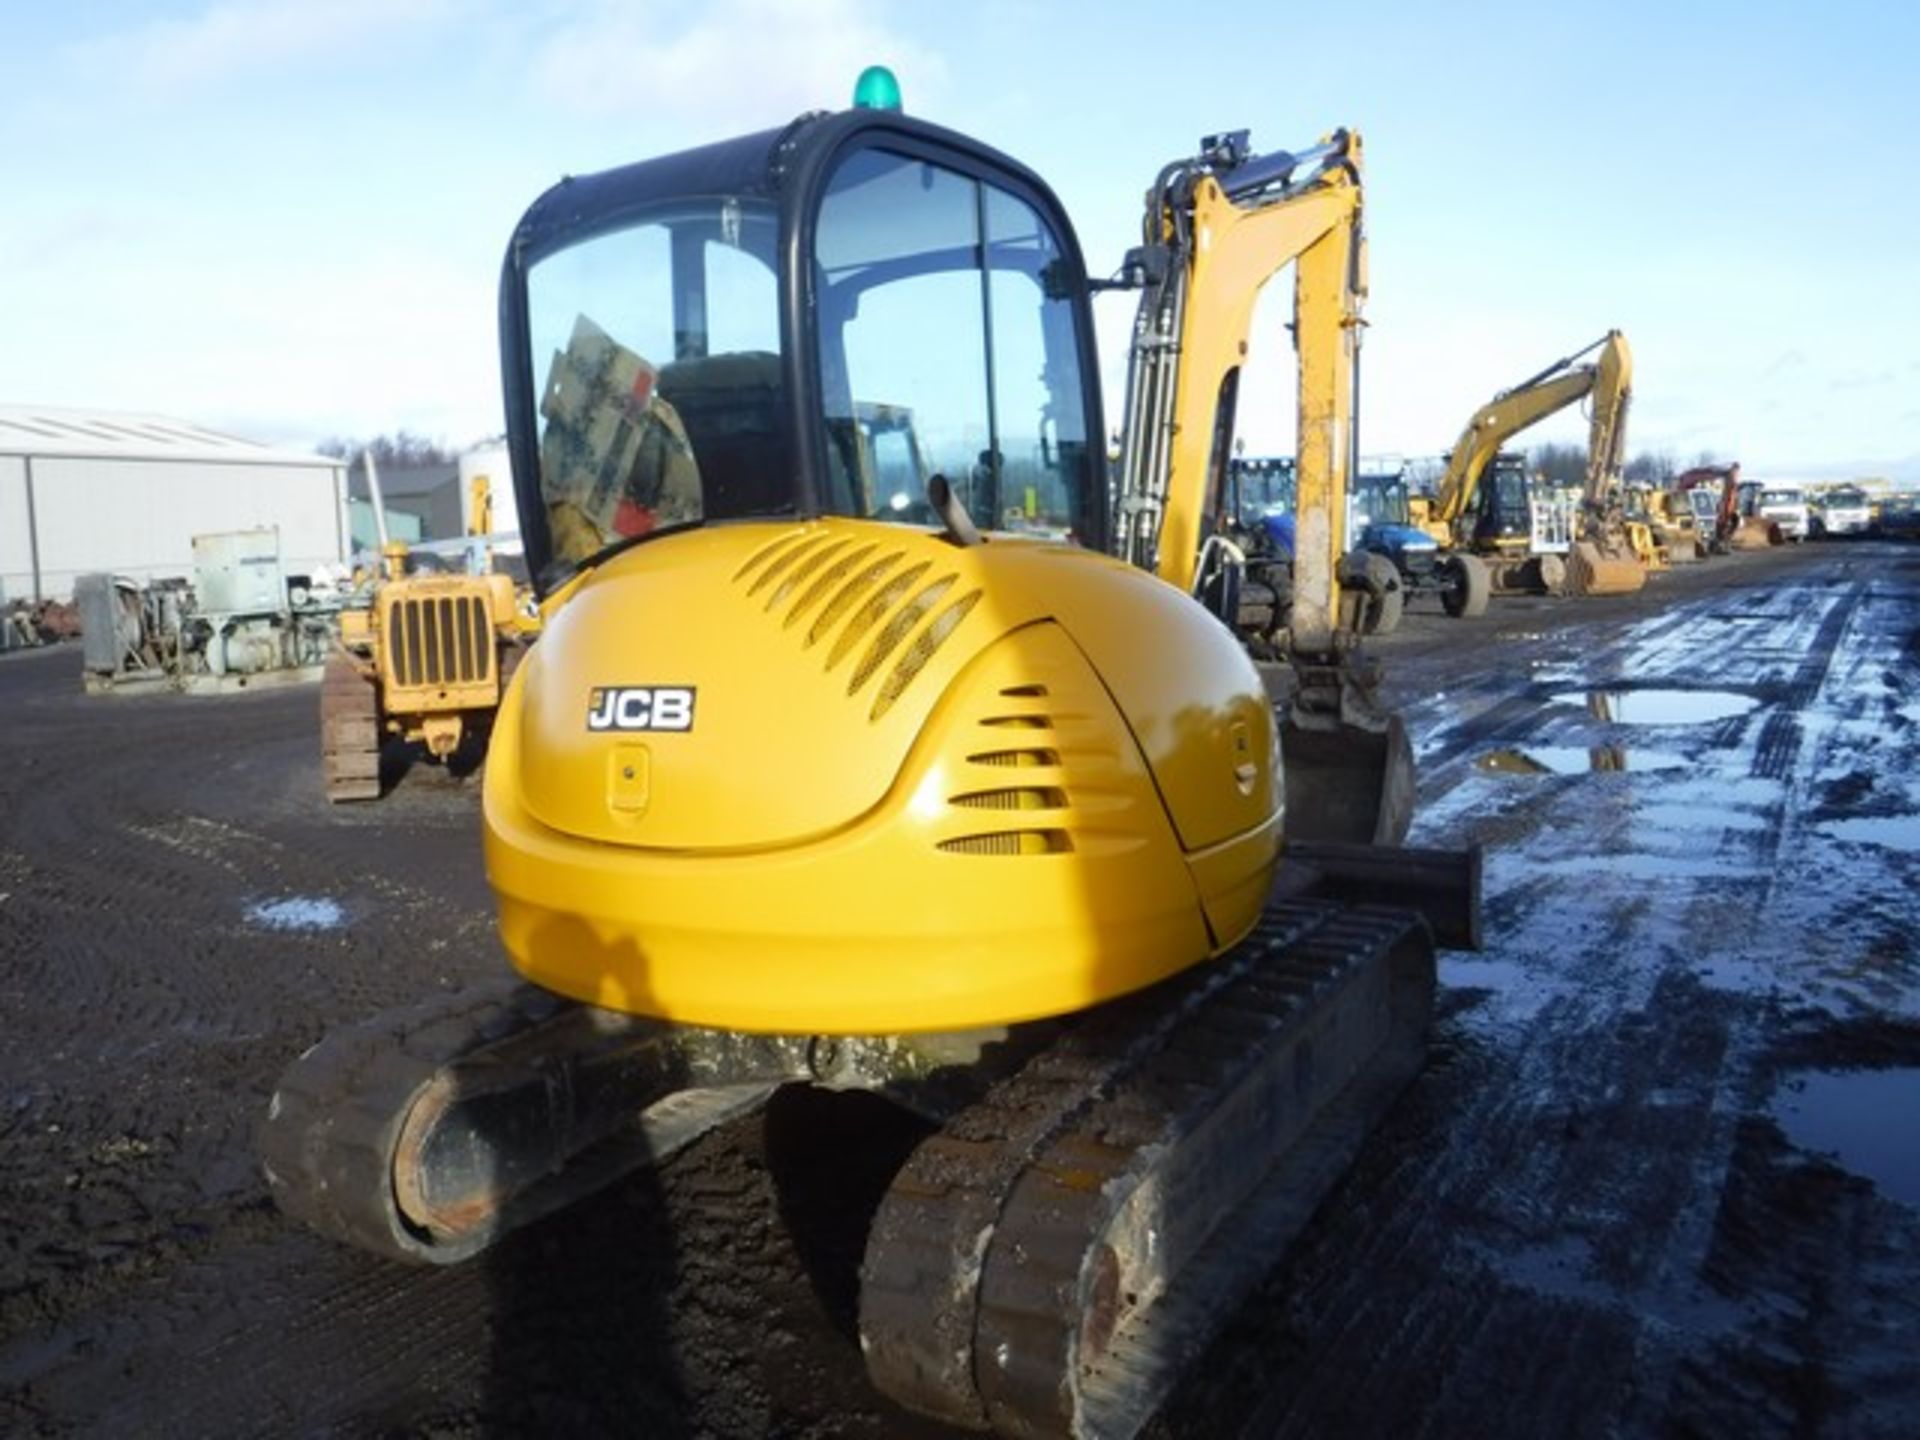 JCB 8050 RTS DIGGER 2015 C/W BUCKET 2103 HRS (NOT BERIFIED) - Image 4 of 7